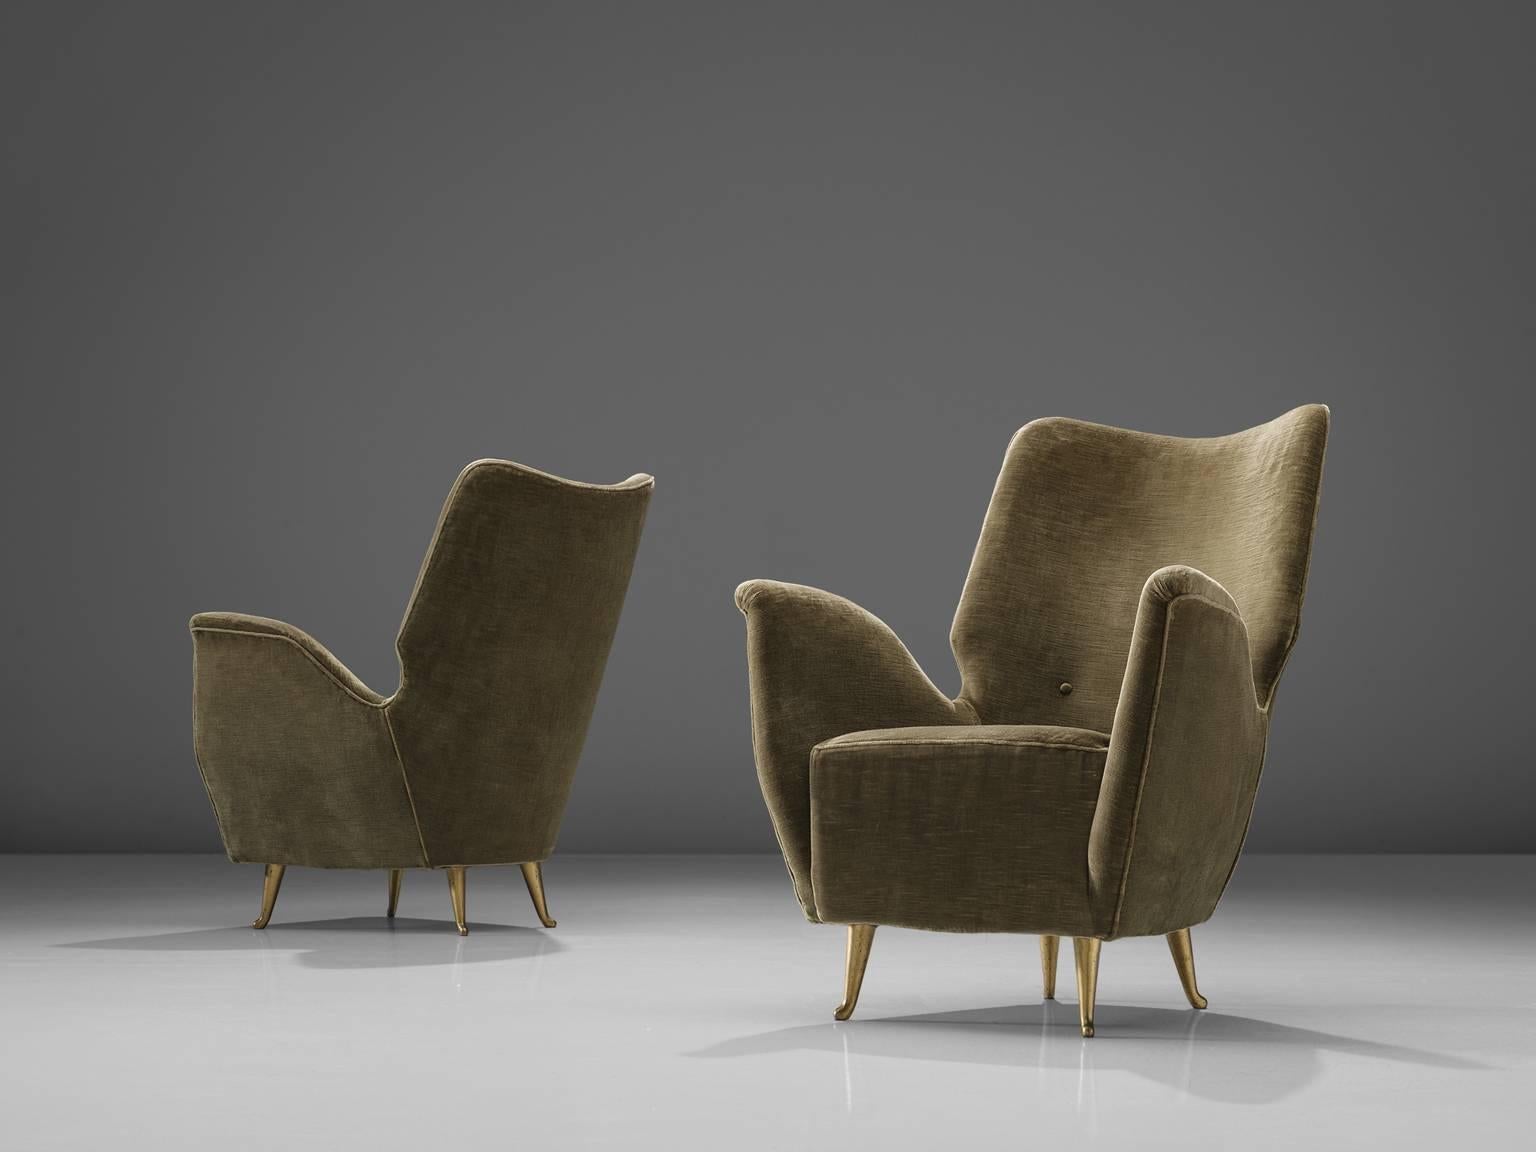 Lounge chairs by ISA, green velvet, brassed metal legs, Italy, circa 1950.

This pair lounge chairs is designed in 1950 in Italy. They stand out thanks to their butterfly armrests and high backs. Their size is wonderfully eloquent thanks to the